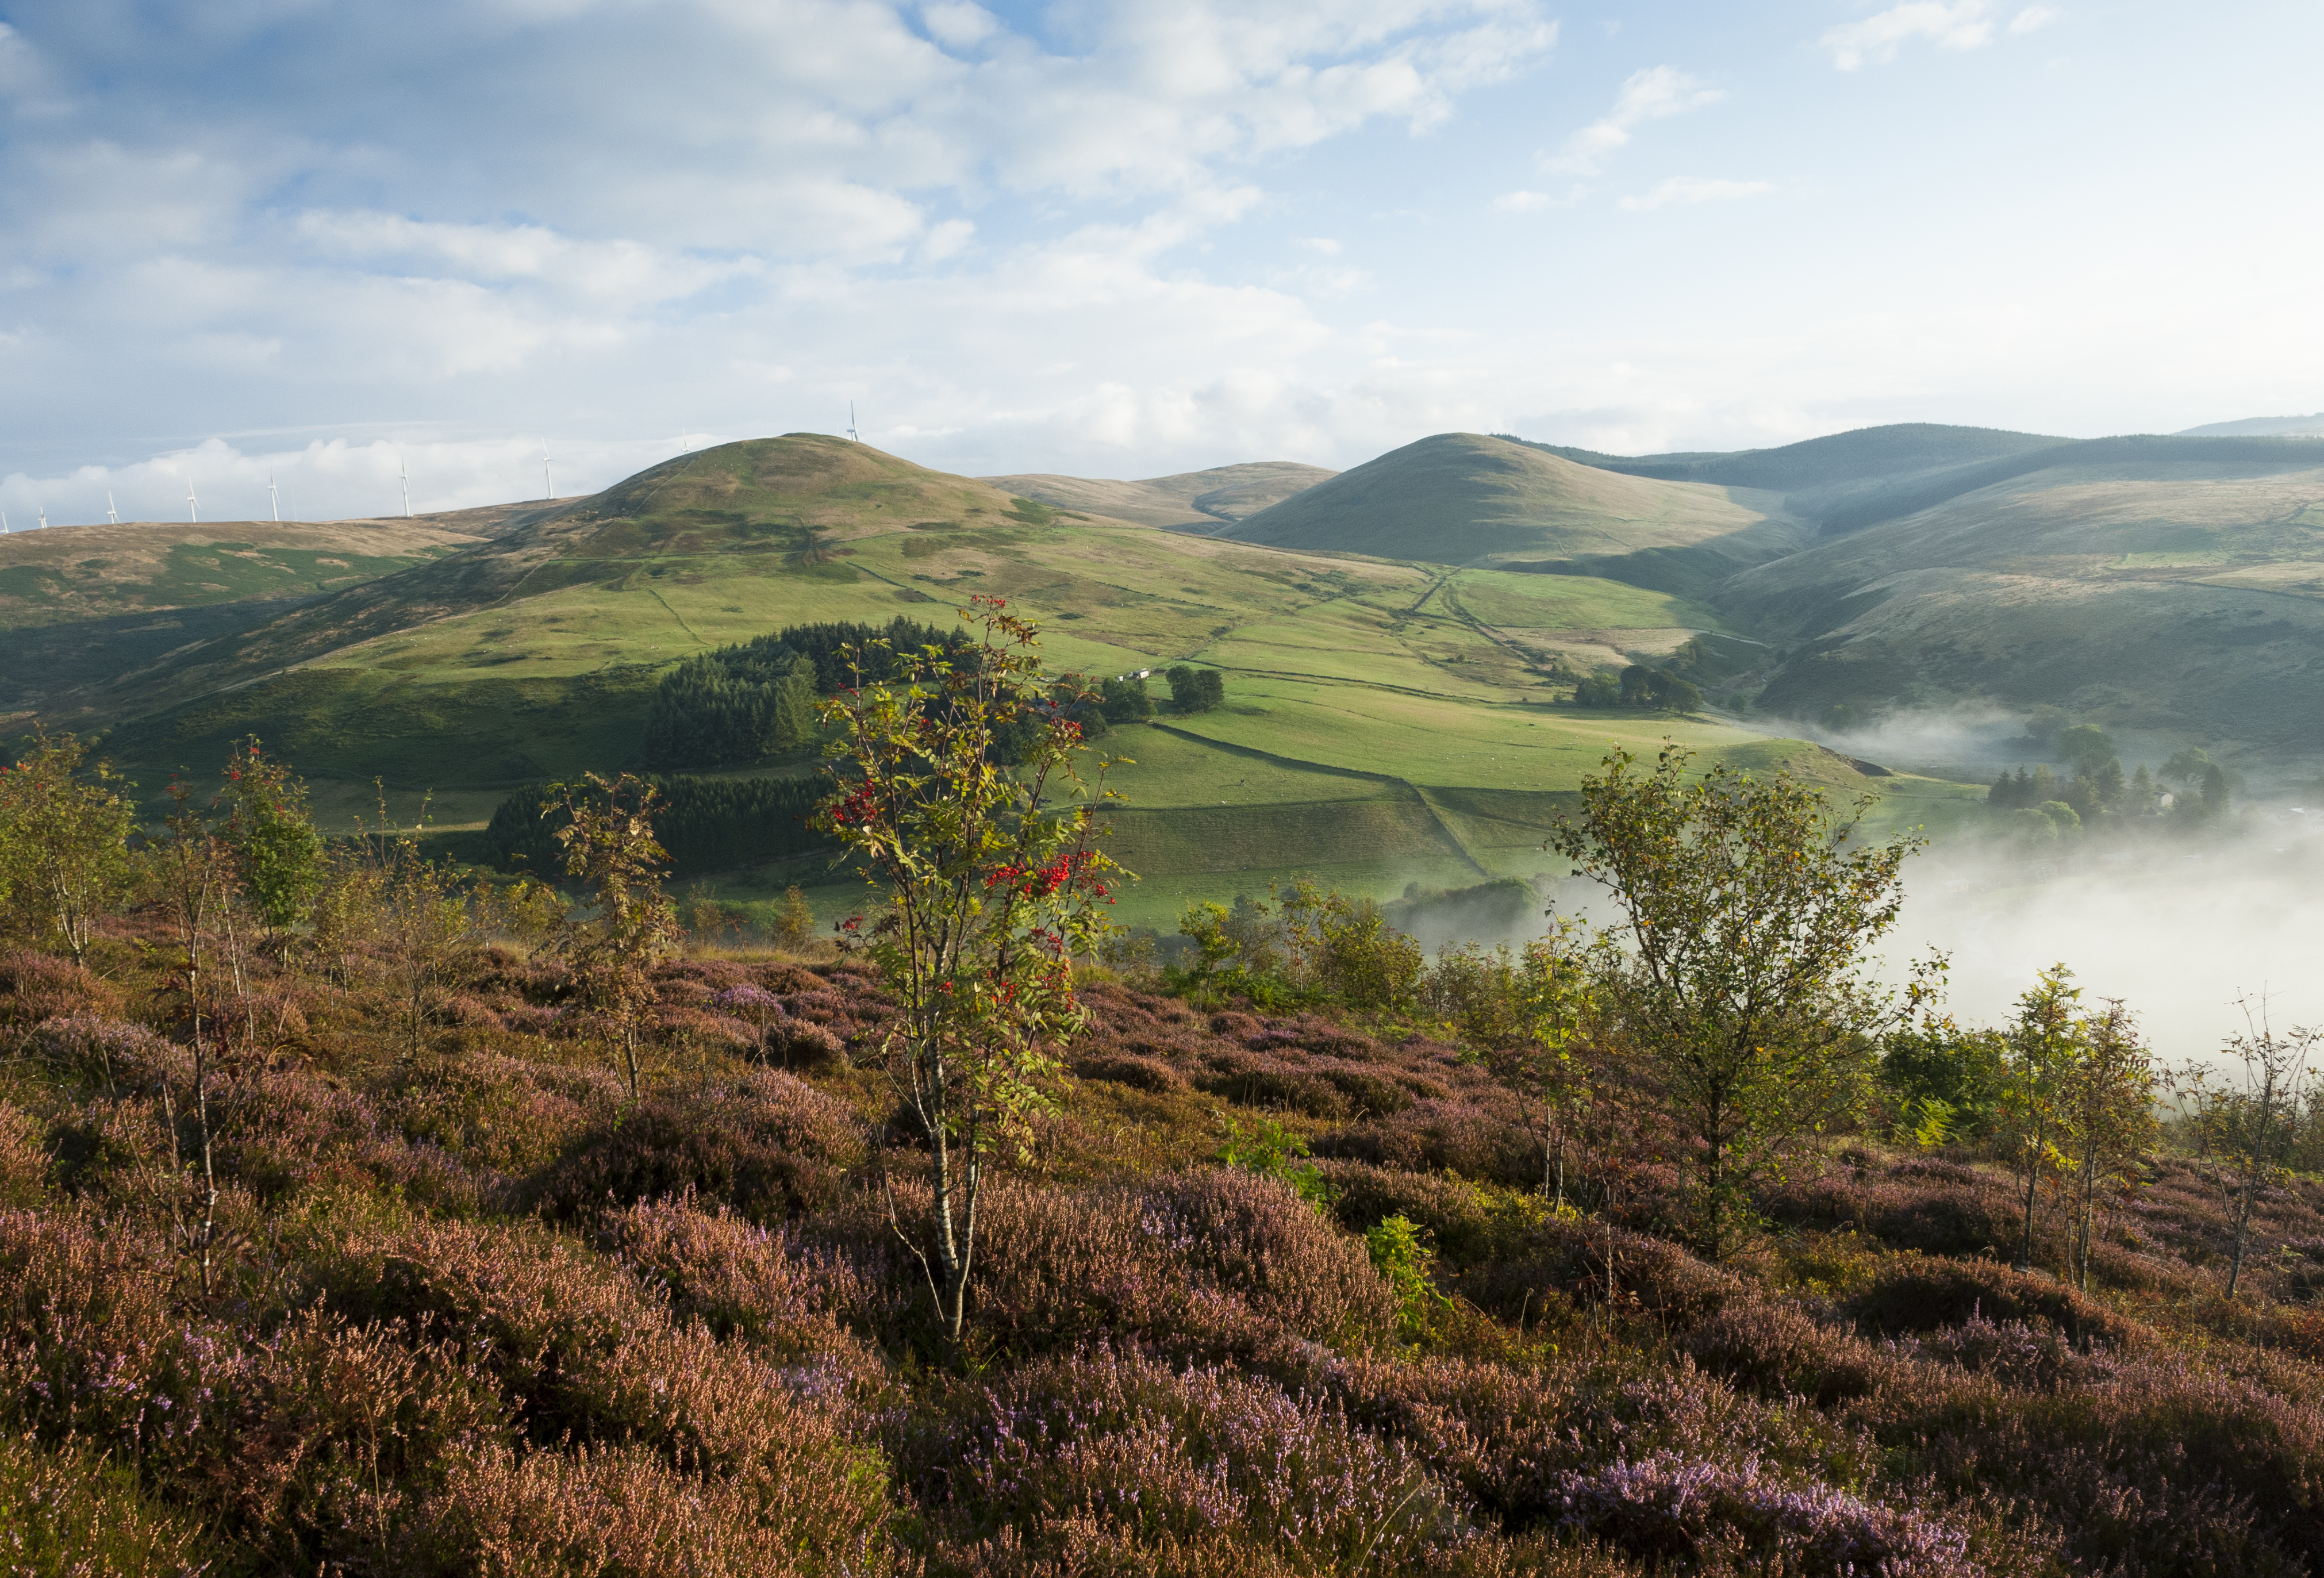 New trees in the landscape in Perthshire, Scotland